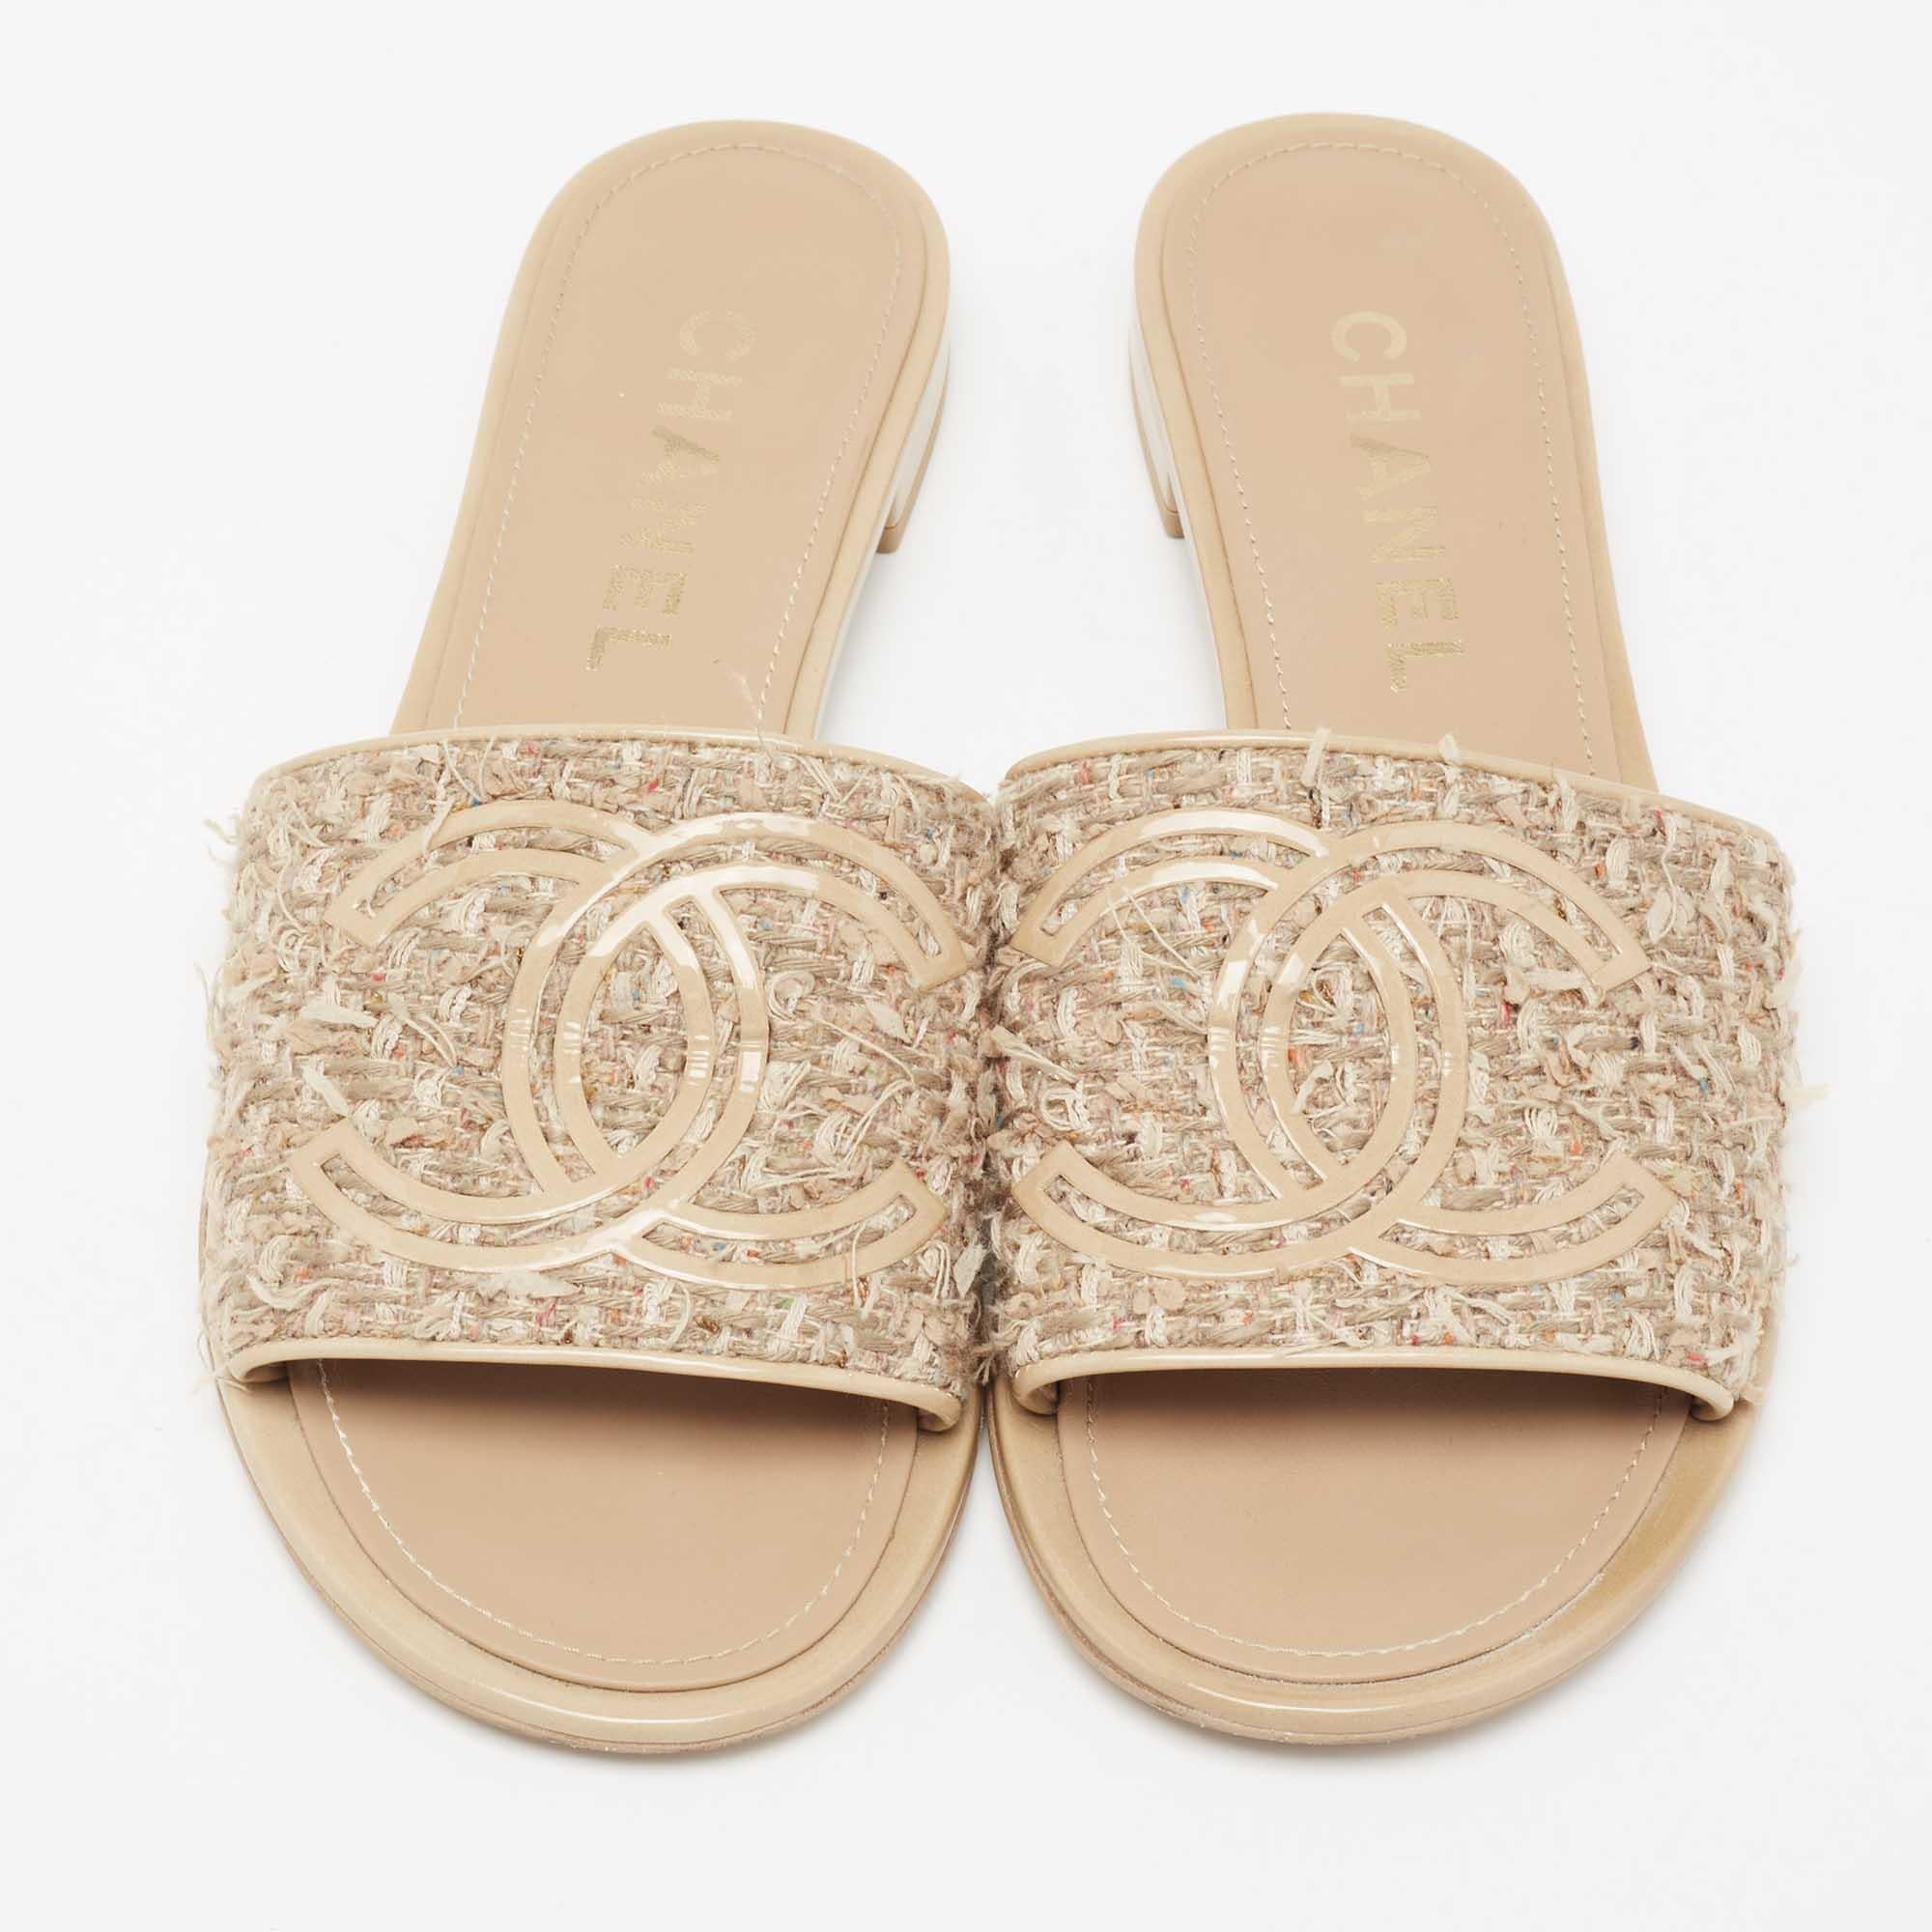 The House of Chanel delivers complete comfort and luxury to your feet with these slide sandals. They are made from beige tweed and leather, with a CC logo detail augmenting the upper. They come with a comfy suede lining and leather-lined soles.